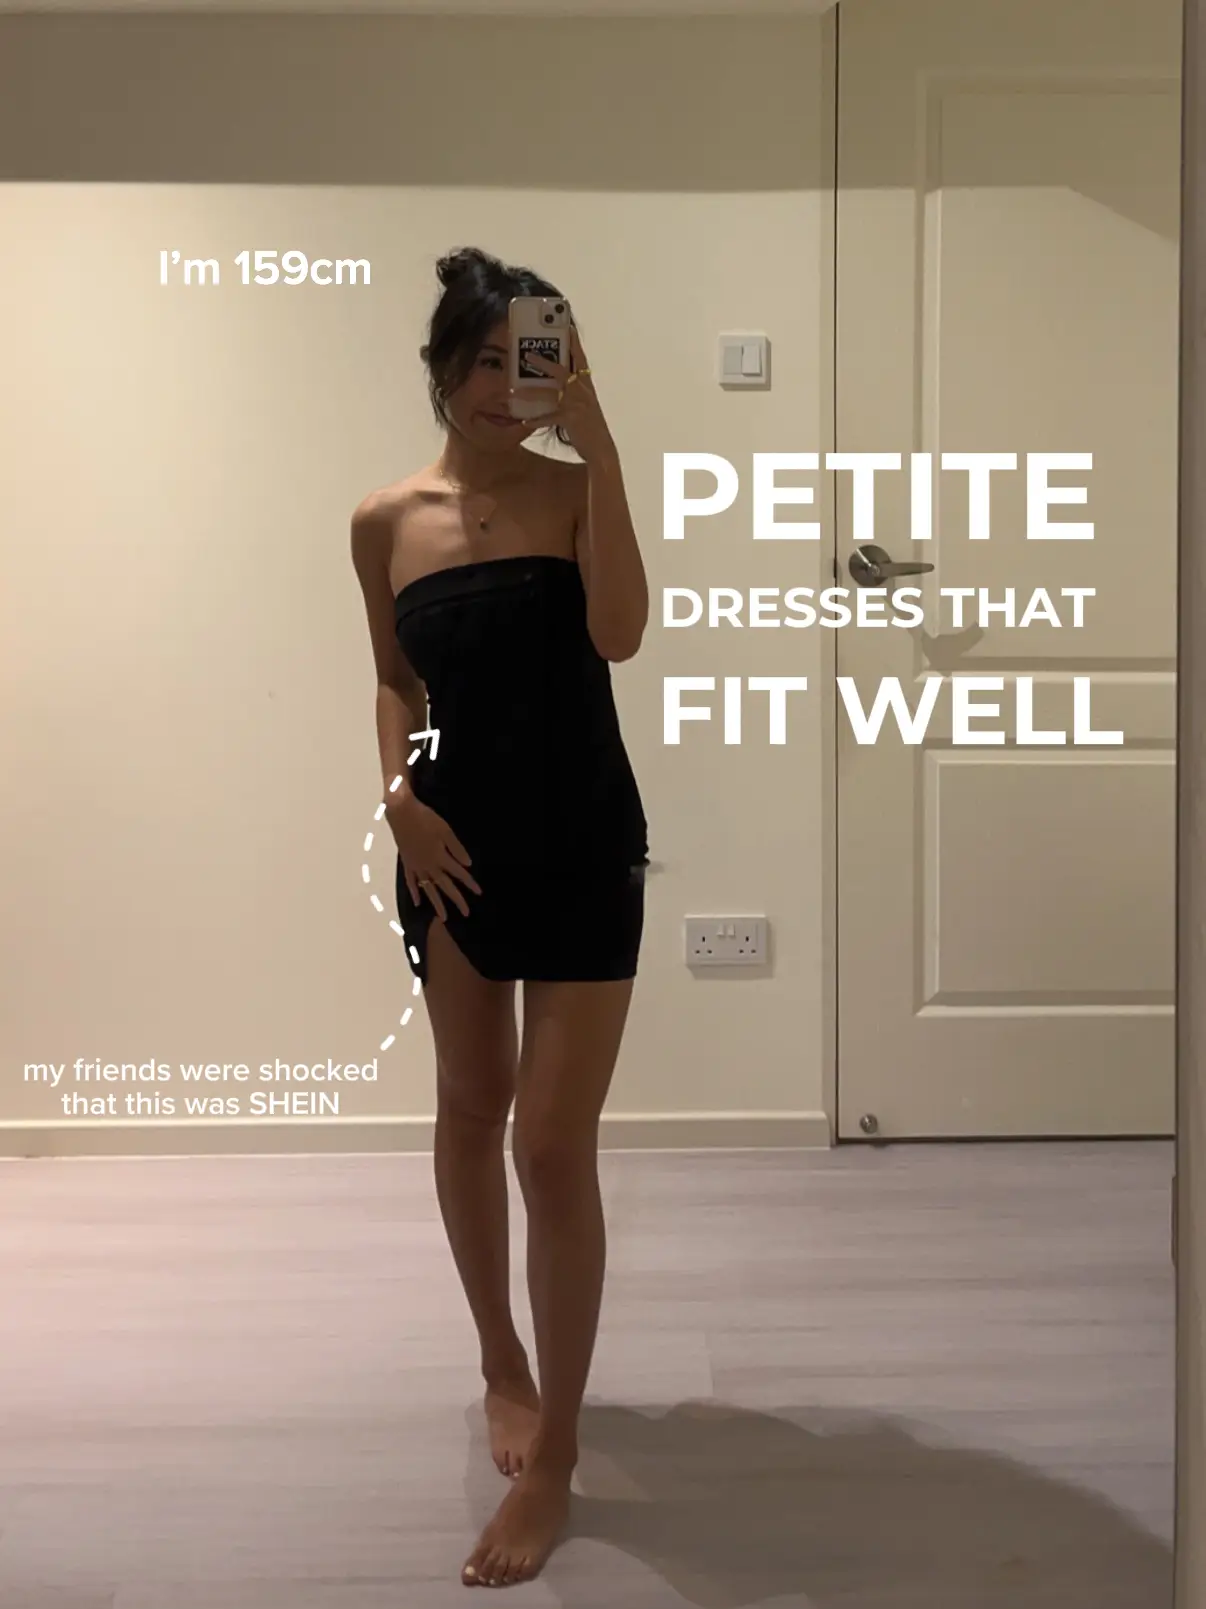 Final look: SHEIN PETITE for my 153cm petite self🧚‍♀️, Gallery posted by  Yidah